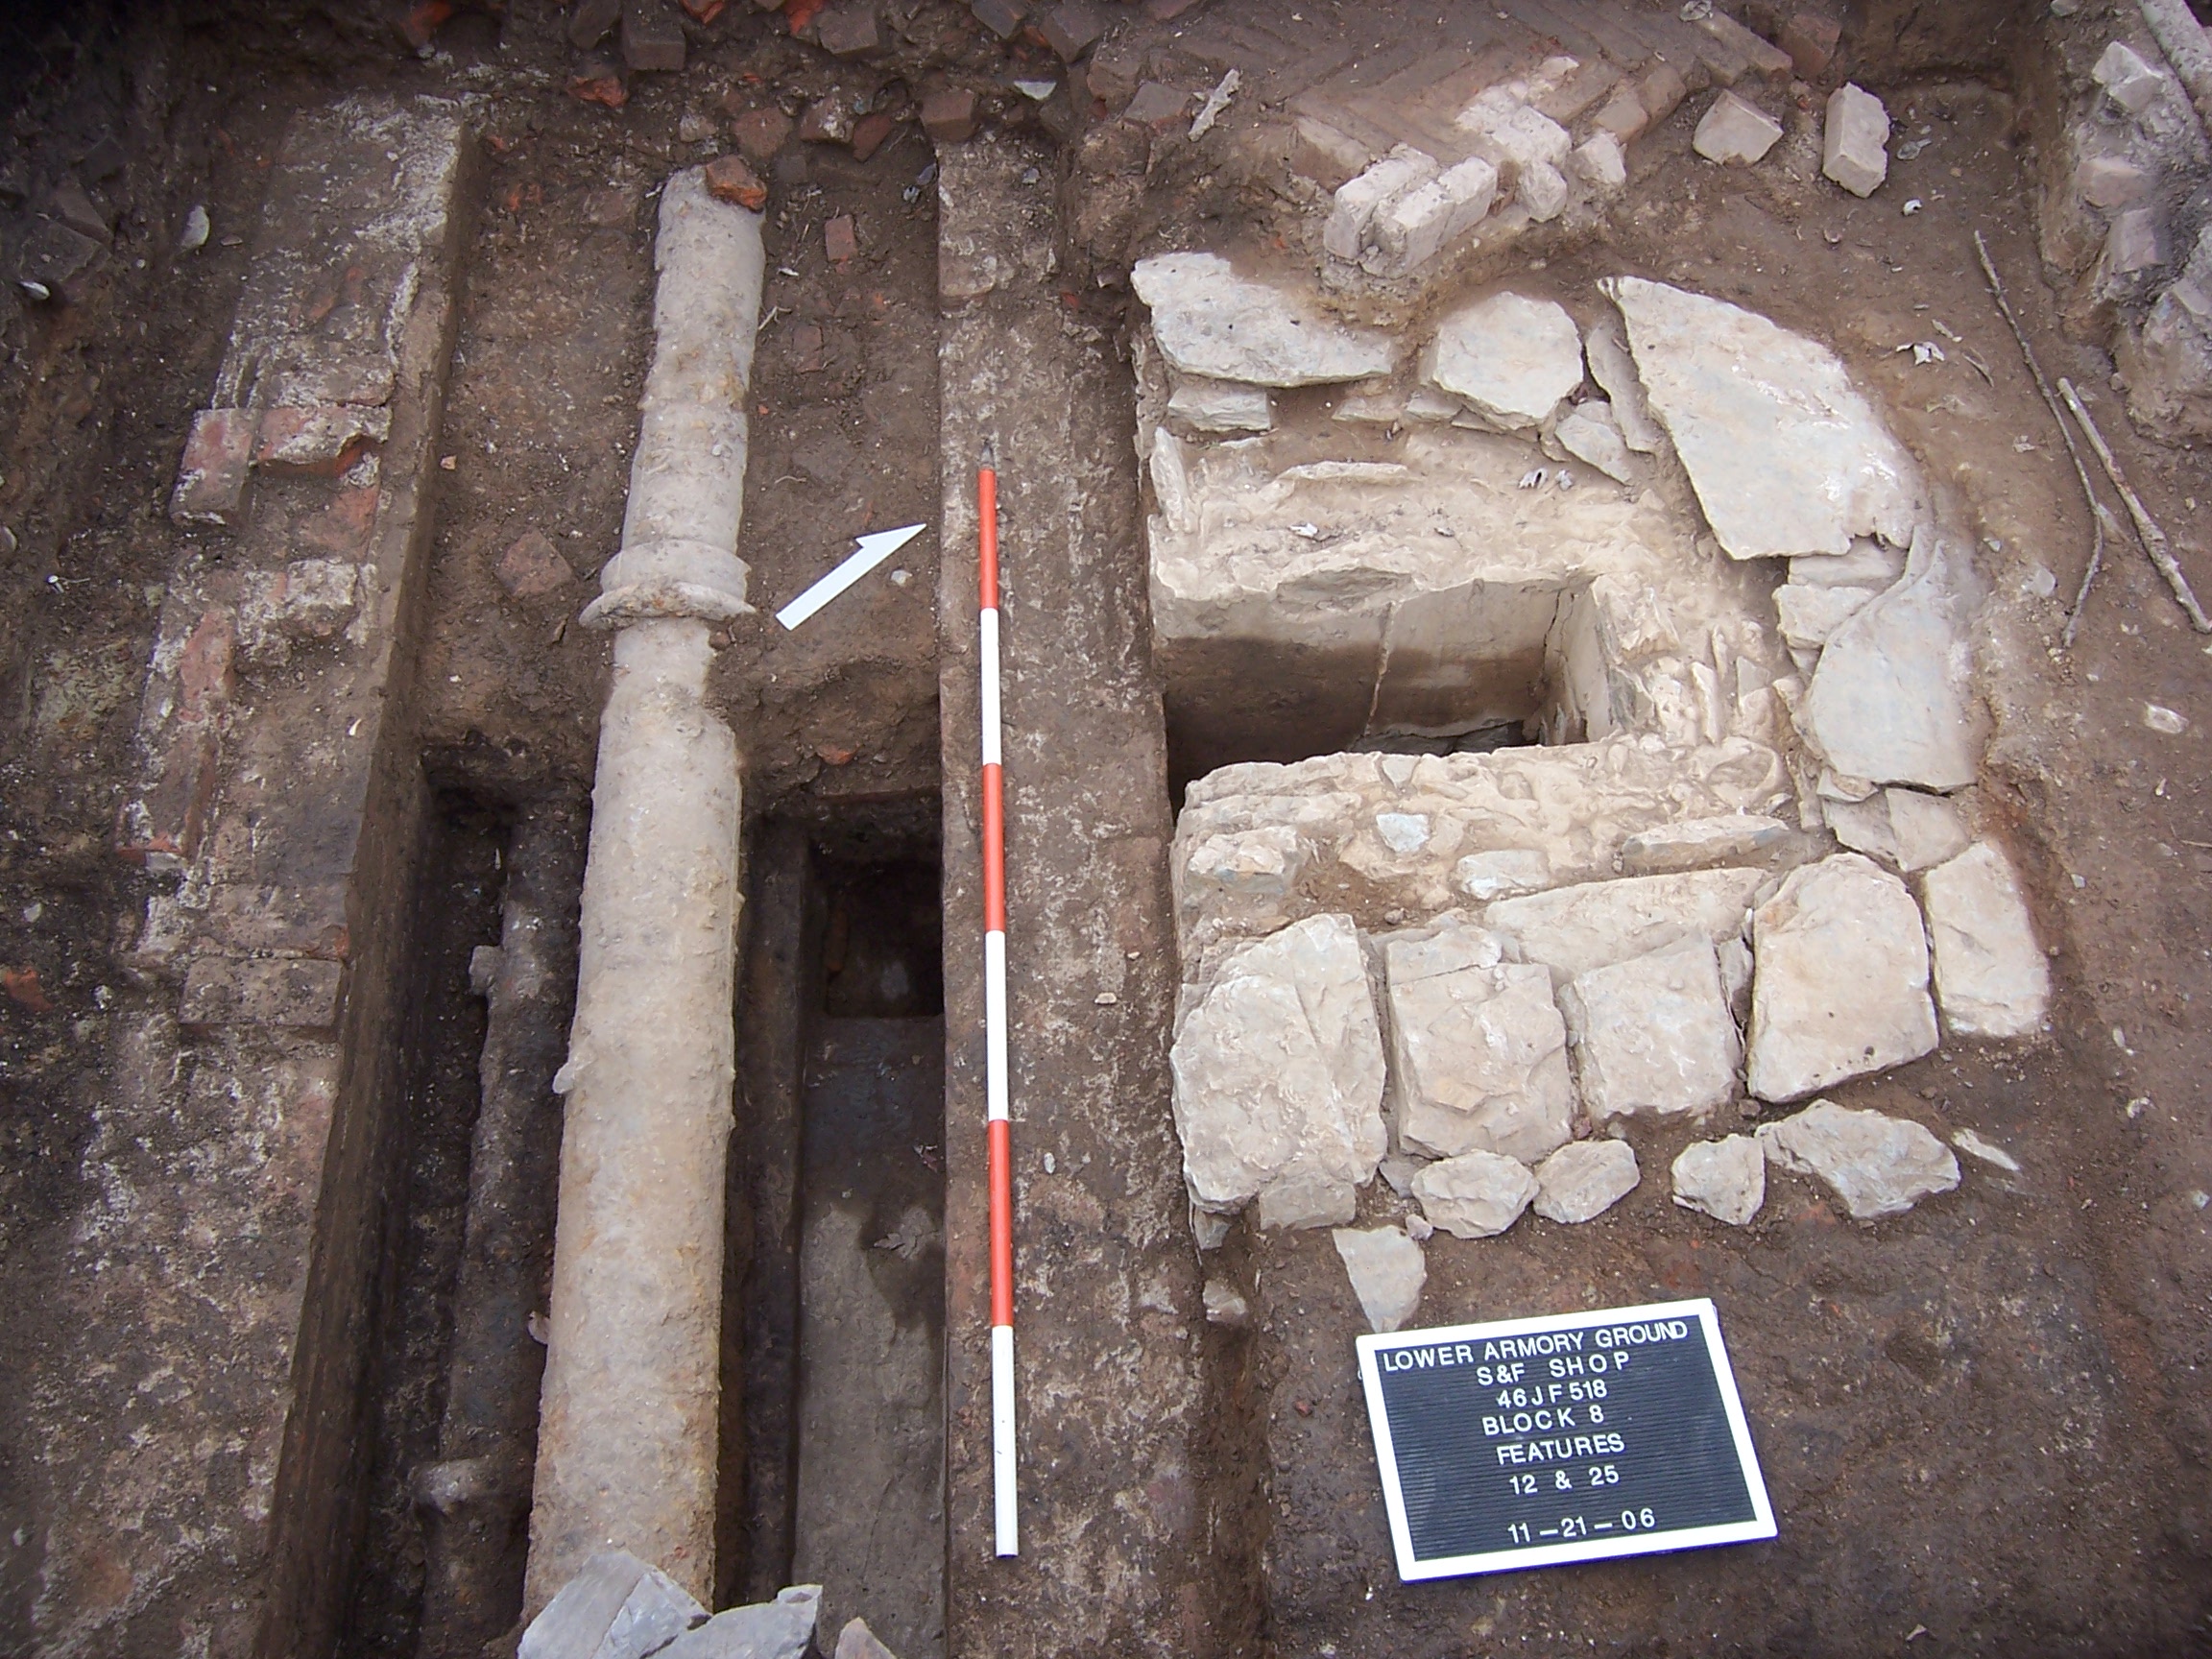 A pipe and rock foundation are exposed in an archaeological dig.